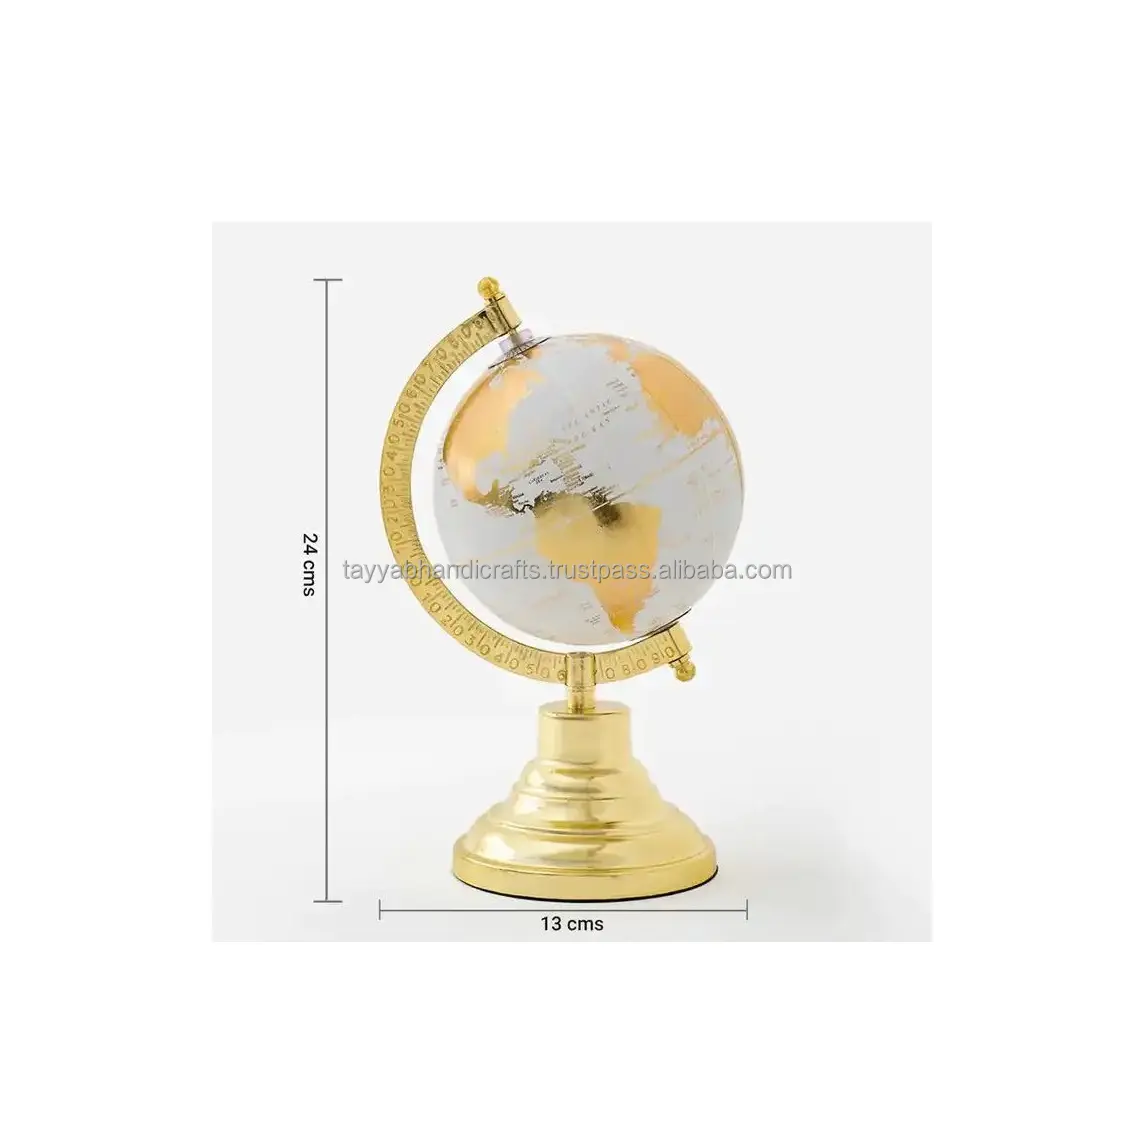 Indian Exporter Light Weight Round Shape Metal Globe for Table Top Decoration Available for Sale from India